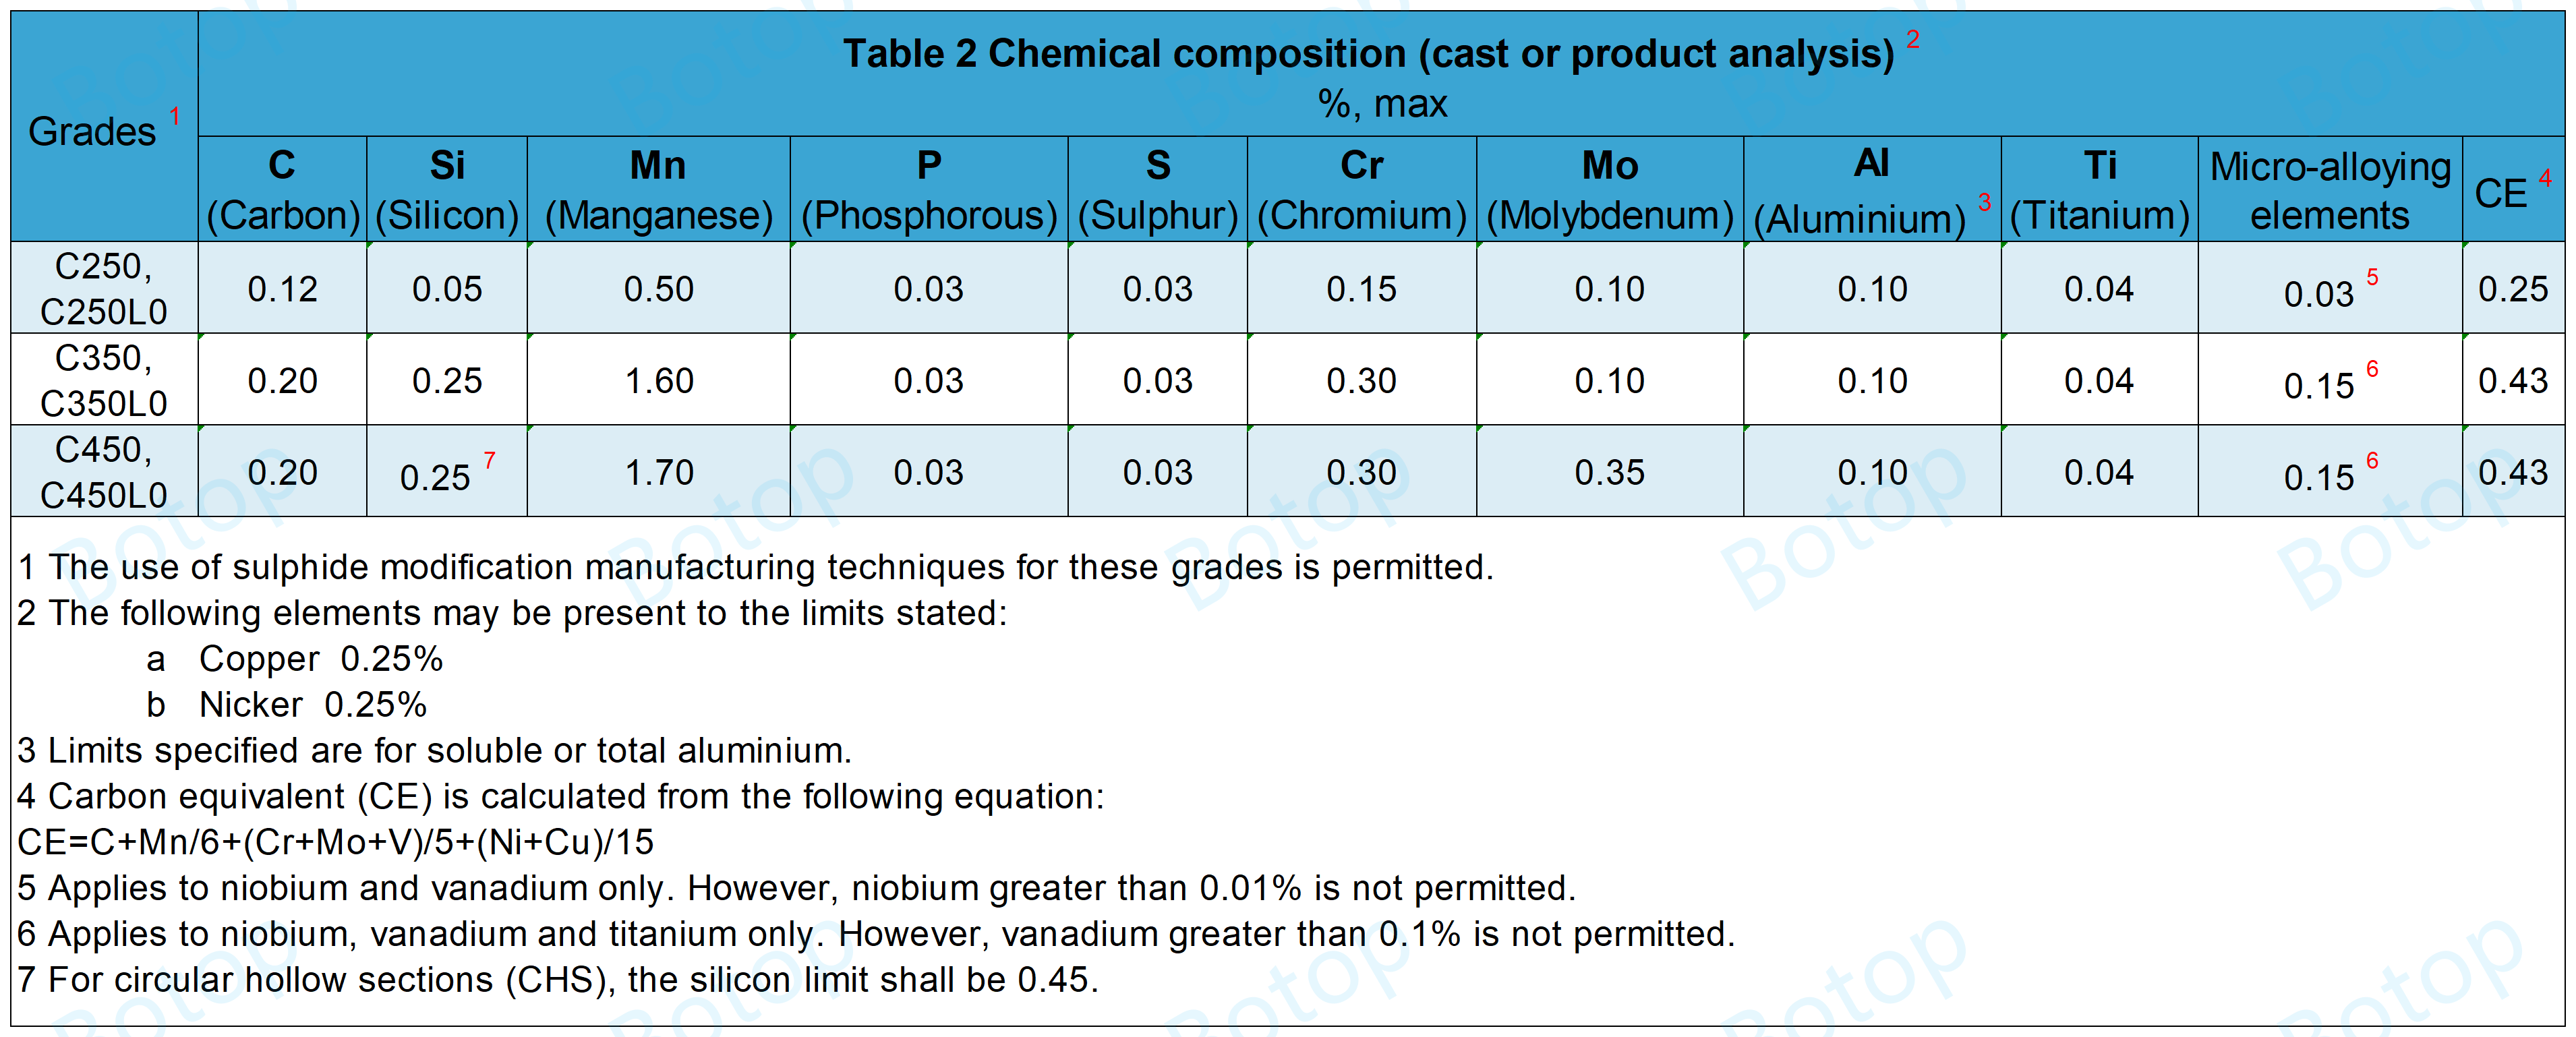 AS NZS 1163 Table 2 Chemical composition  (cast or product analysis)